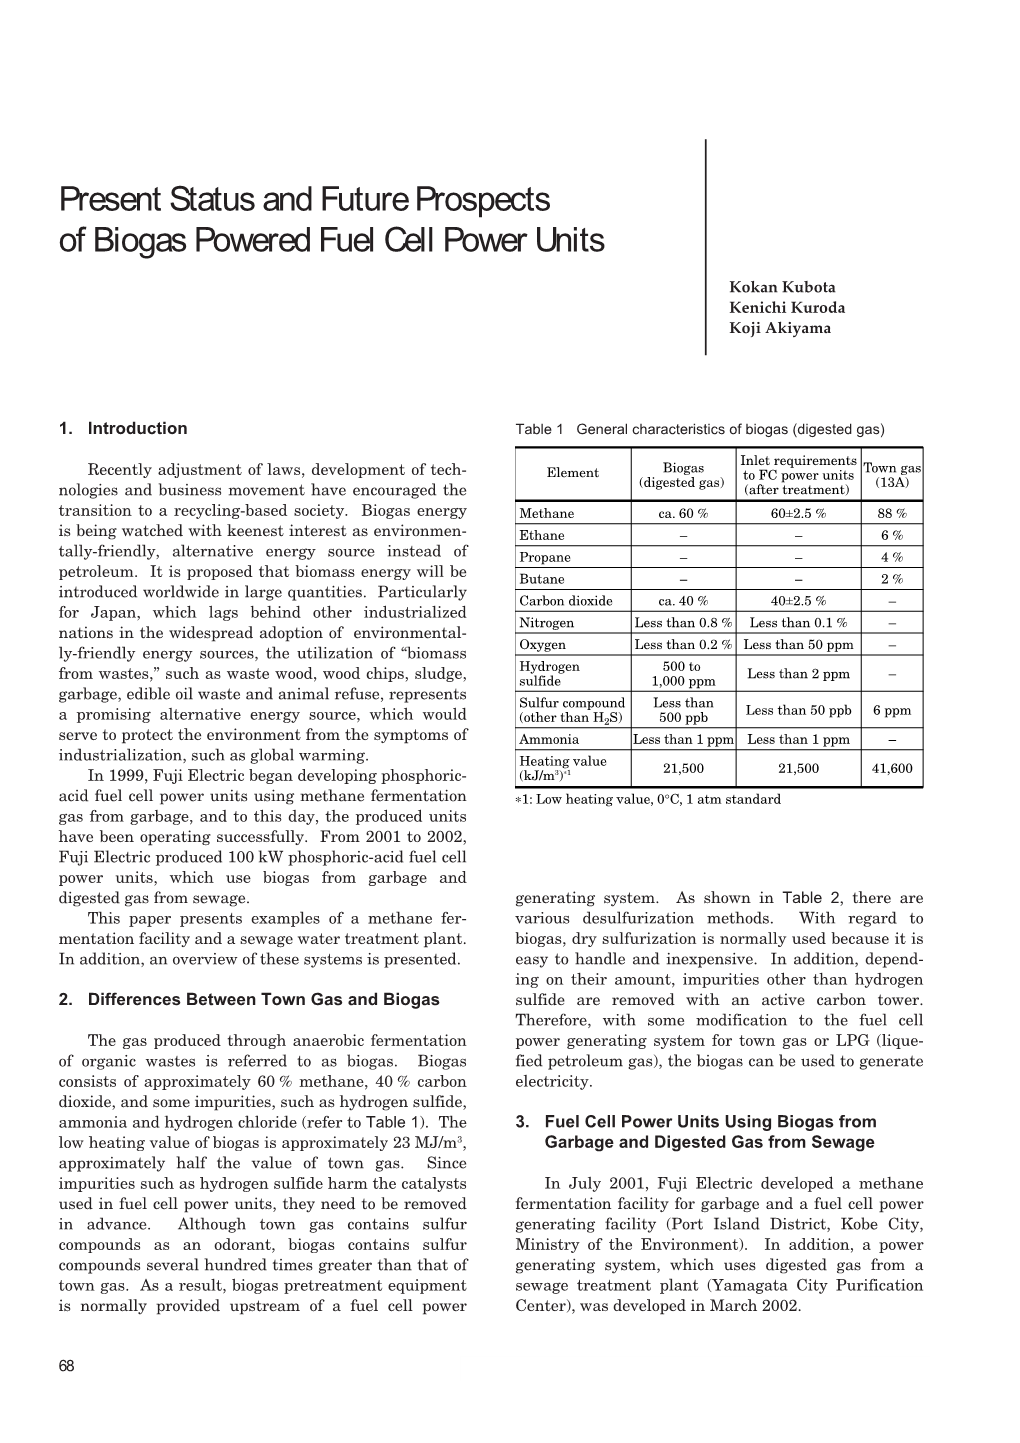 Present Status and Future Prospects of Biogas Powered Fuel Cell Power Units